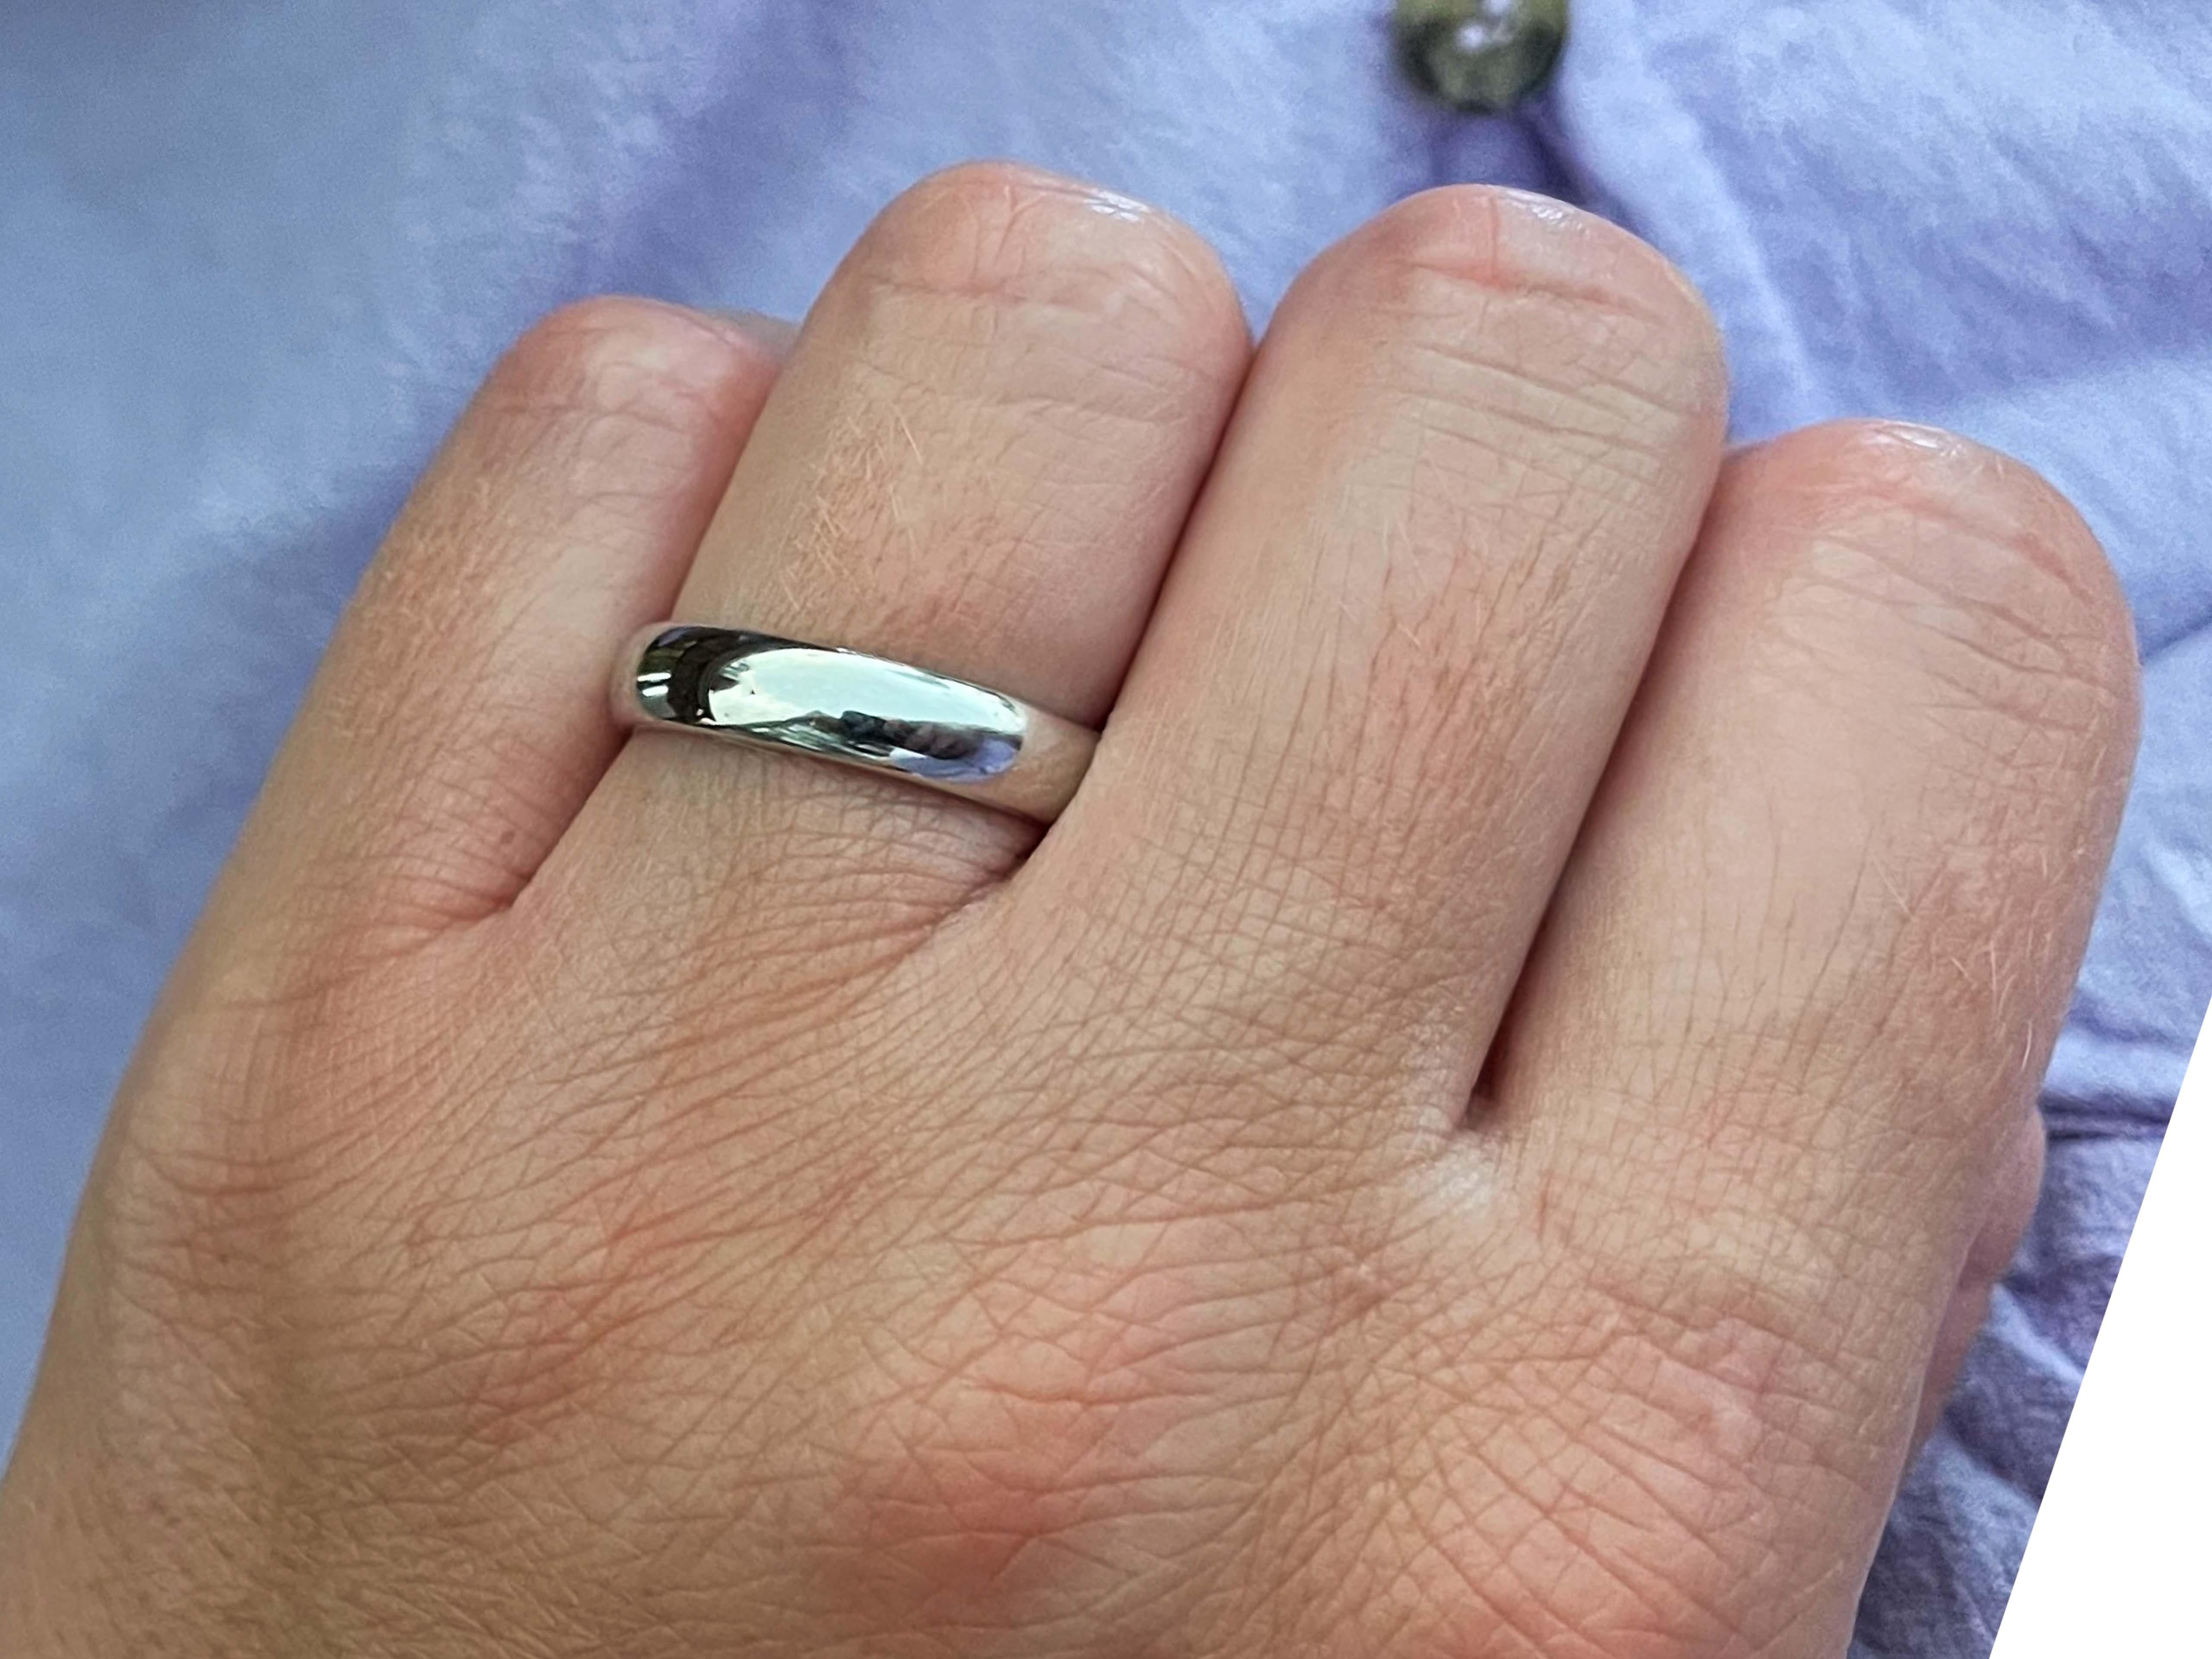 Authentic Tiffany & Co. wedding band. This band is beautifully crafted in platinum 950 with a high polish finish. The band is 4.5 mm wide.  The band is hallmarked 